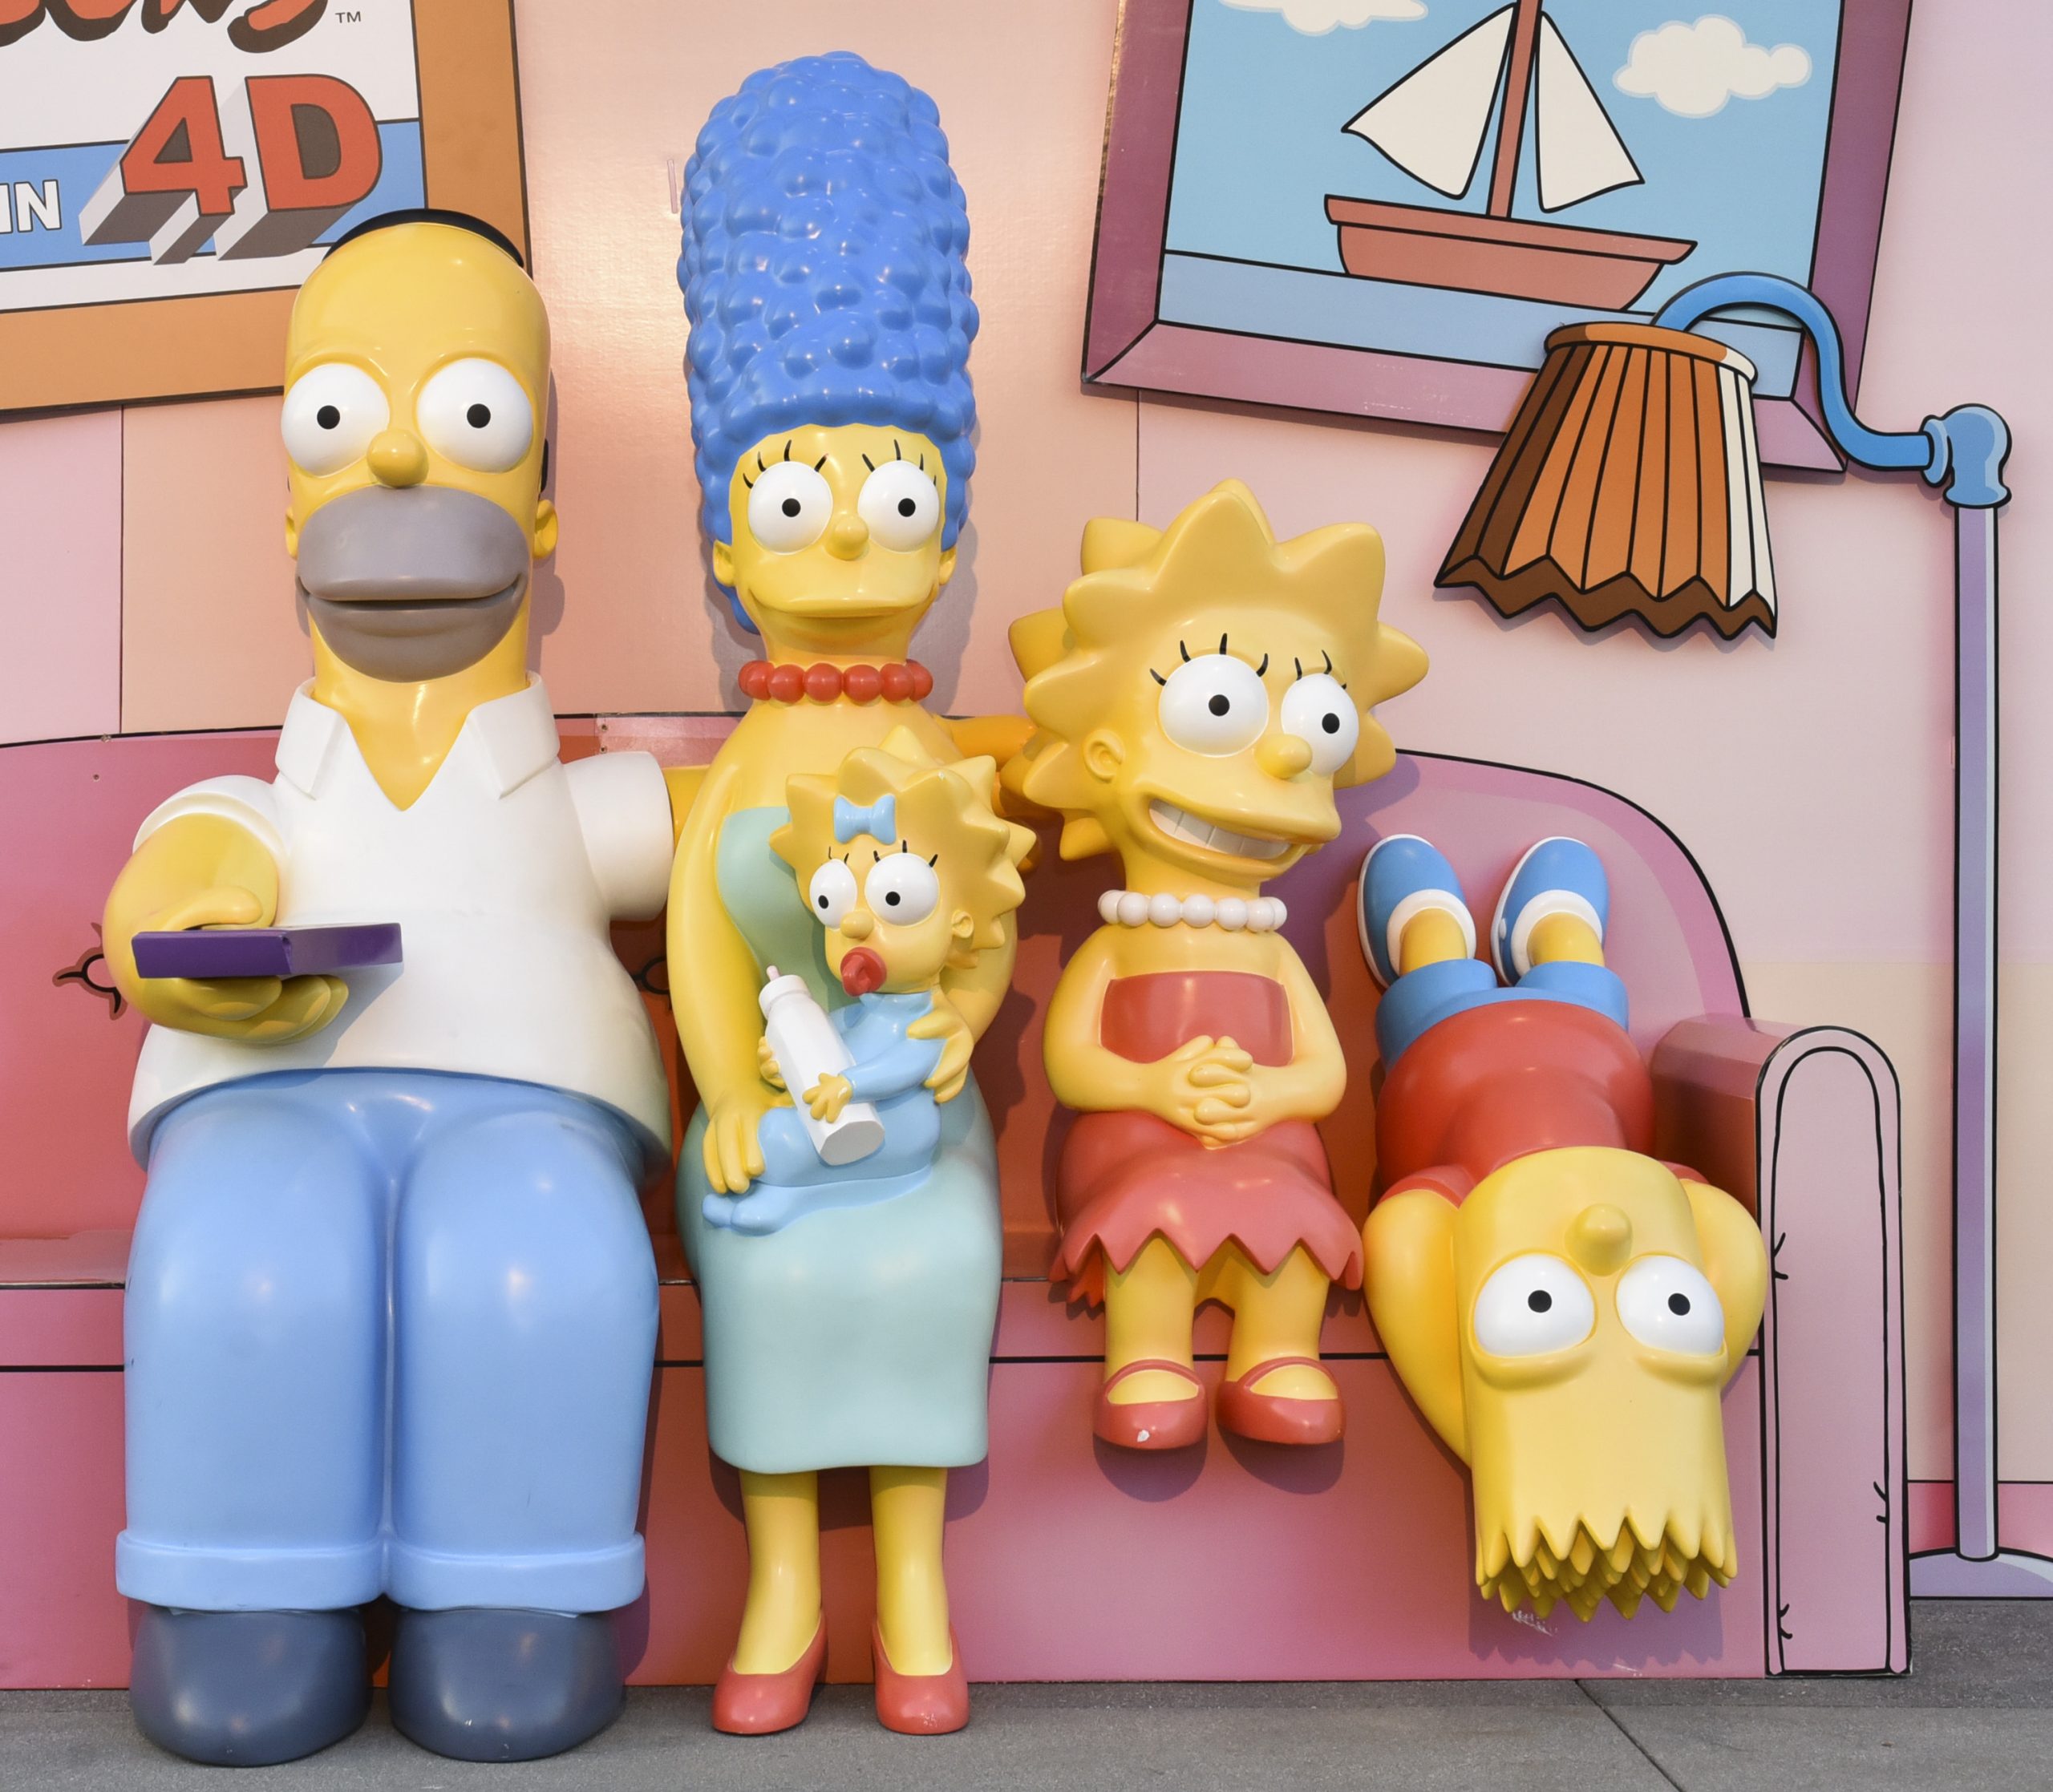 The Simpsons': How This Season 3 Episode Saved a Child's Life